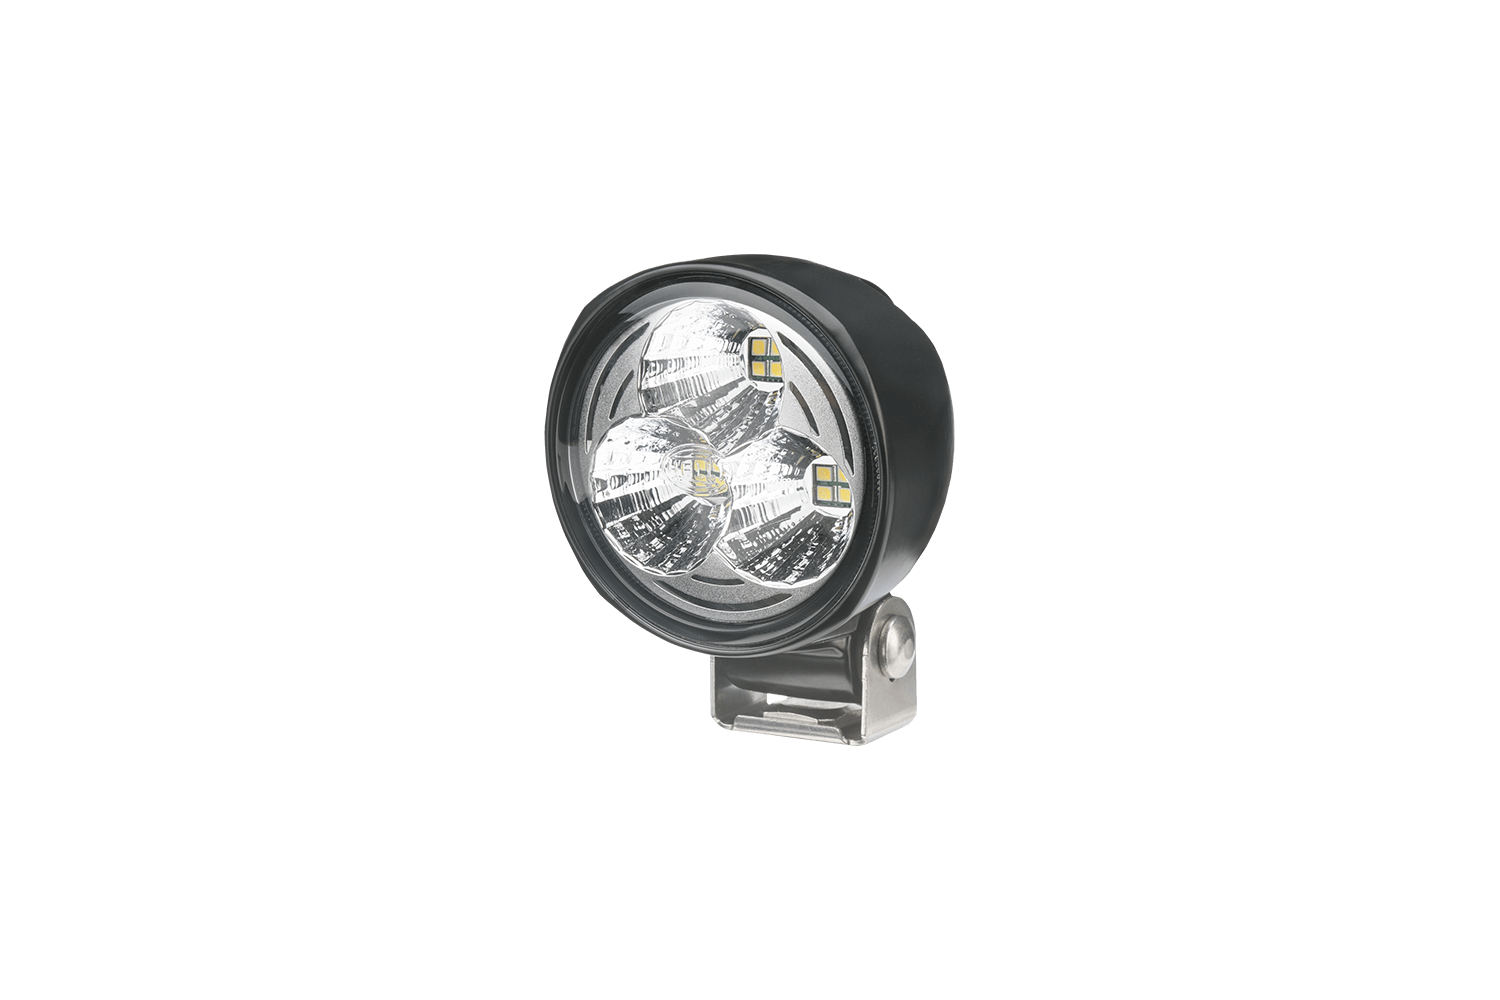 Module 70 LED Generation 3.2 work lamps from Hella offered by Patlon